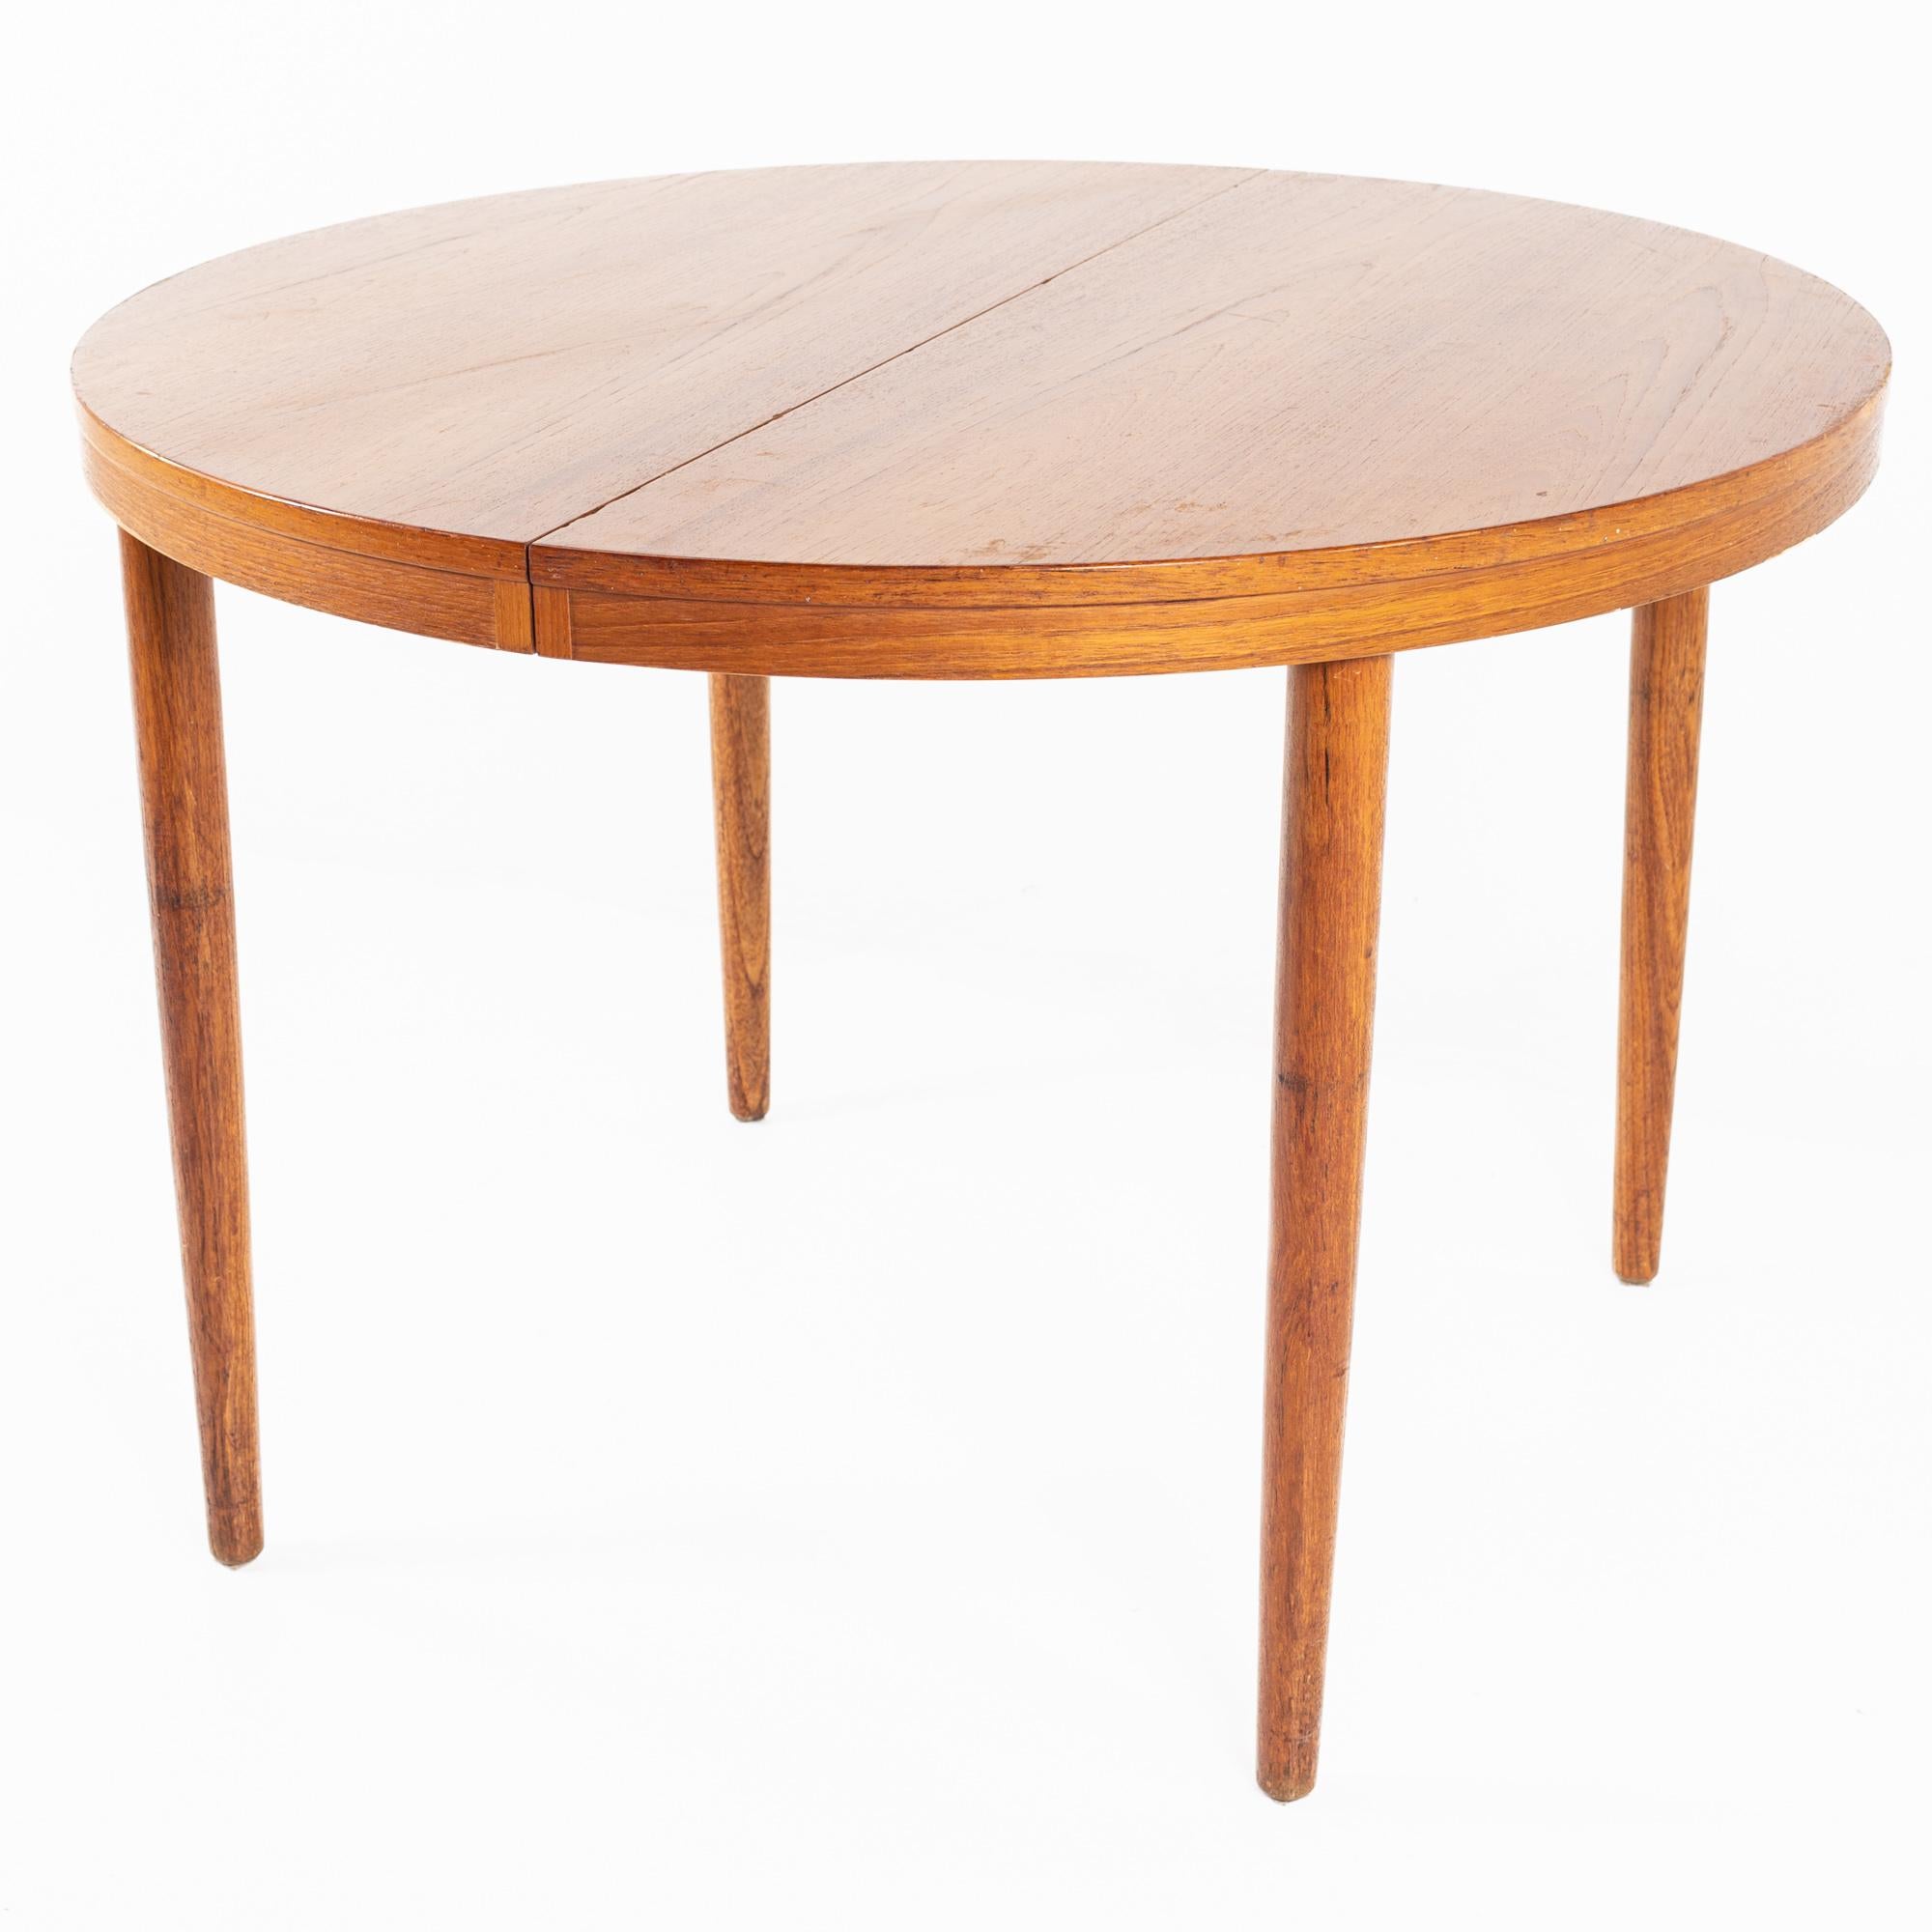 41 inch round dining table